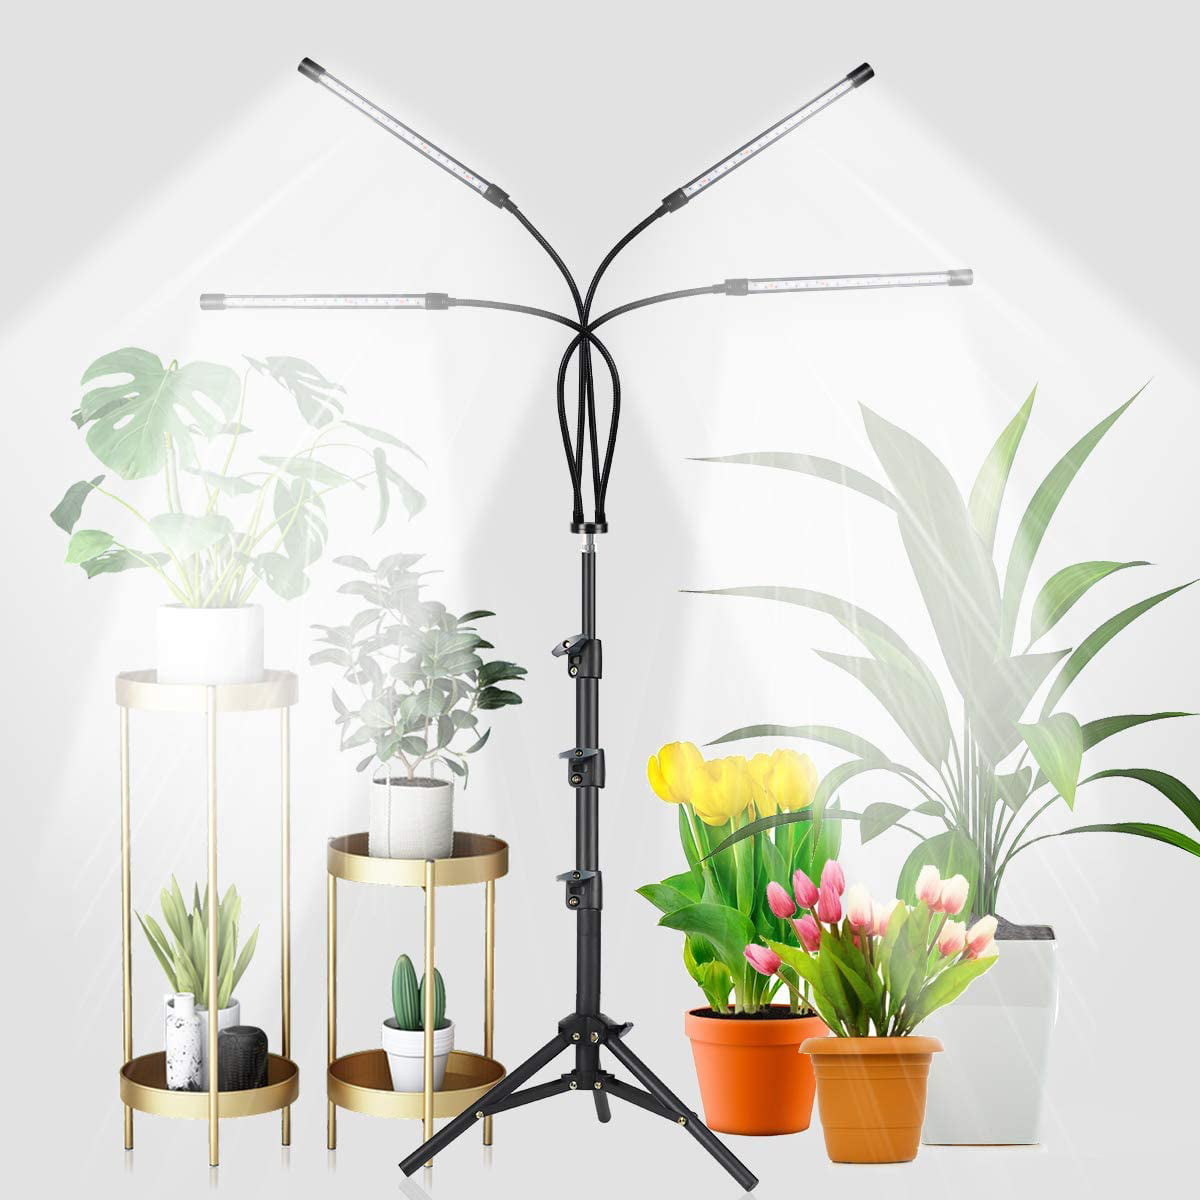 Plant Grow Light with Stand Adjustable 15-47 Inch,Tri-Head Floor Lamp Plant Ligh 